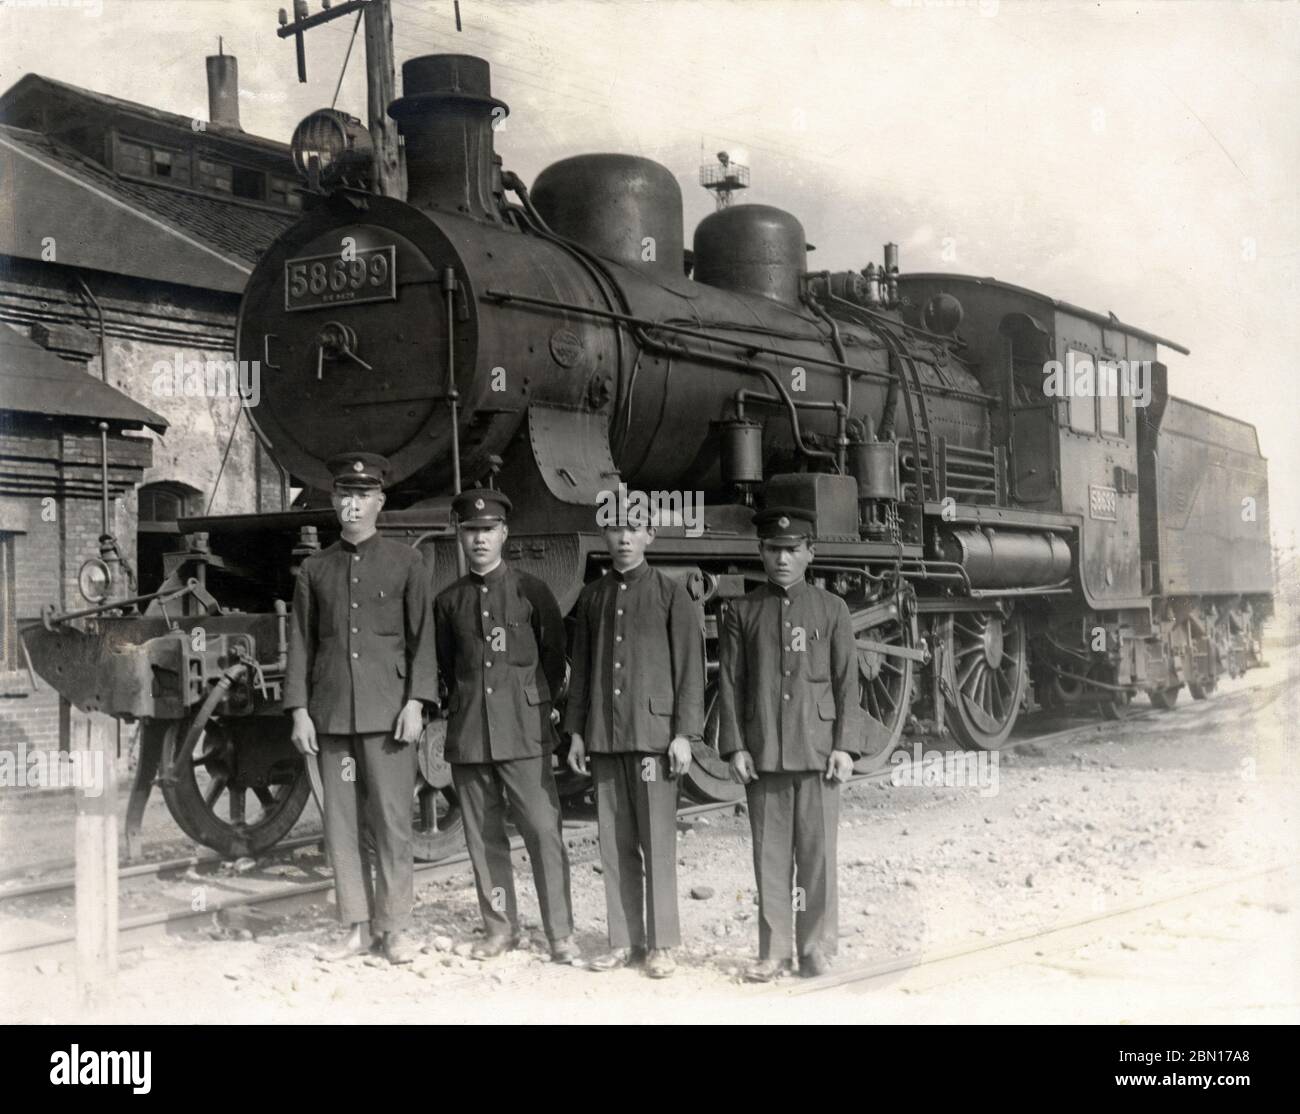 [ 1931 Japan - Imperial Train ] —   Commemorative photo of railway workers in front of a Class 8620 (8620形) steam locomotive with the number 58699.  The photo is dated August 12, 1931 (Showa 6). According to the photo’s caption, the locomotive was used to pull the imperial train of Takahito, Prince Mikasa (三笠宮崇仁親王, 1915–2016).  20th century vintage gelatin silver print. Stock Photo